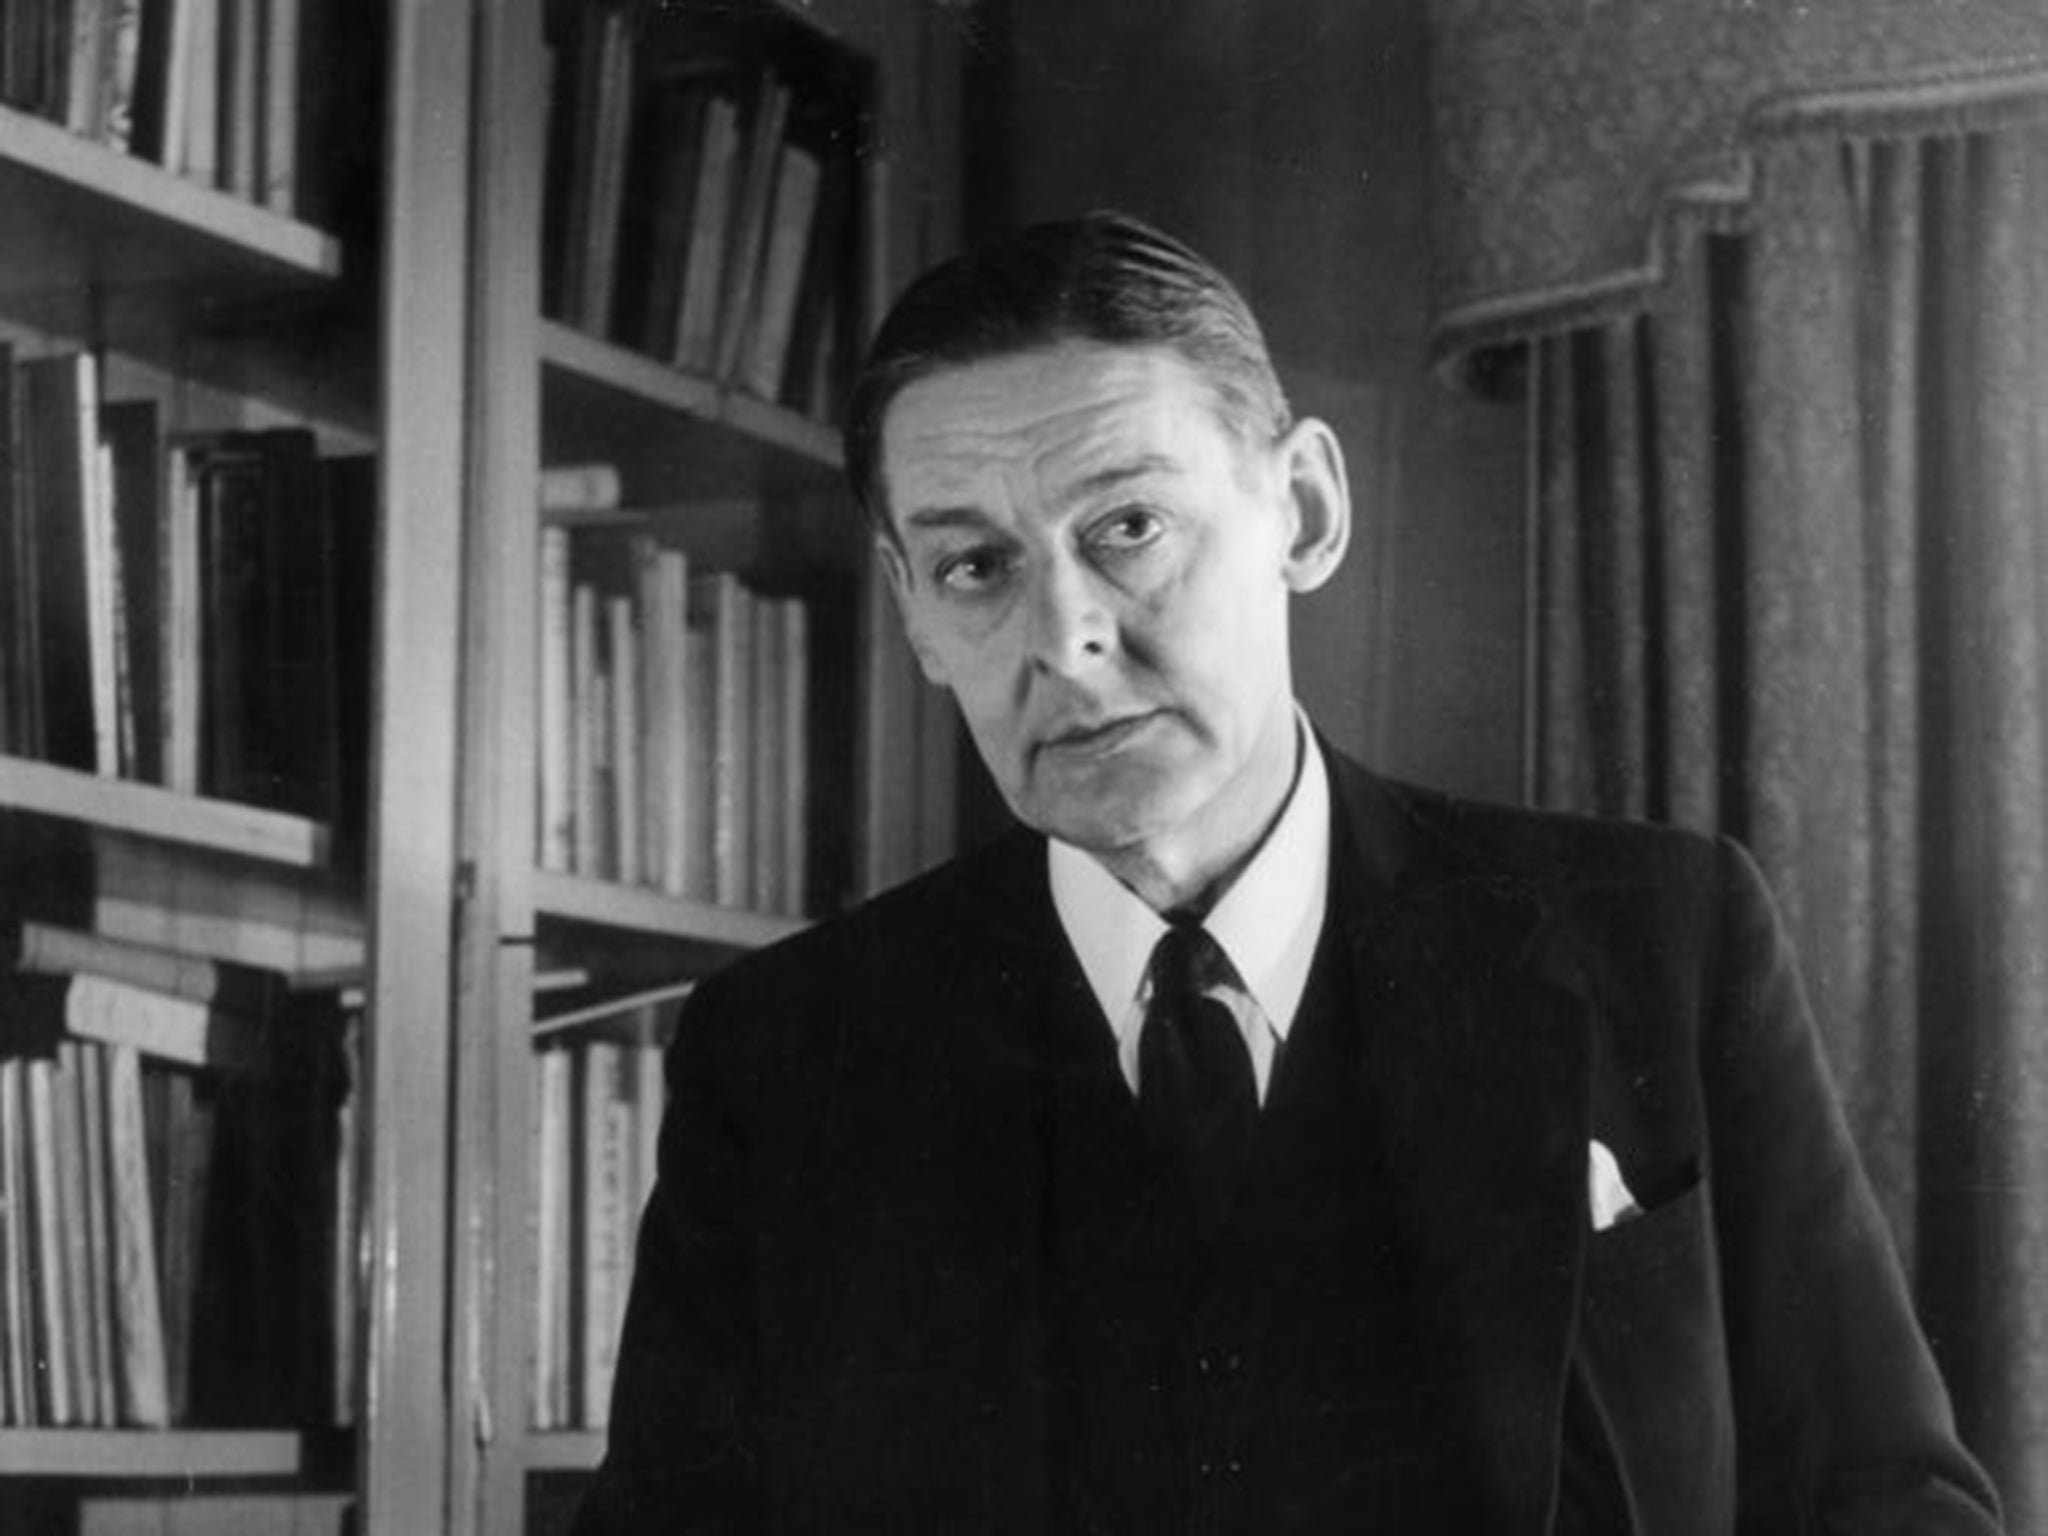 T S Eliot is frequently cited as being exemplative of creative exceptionalism